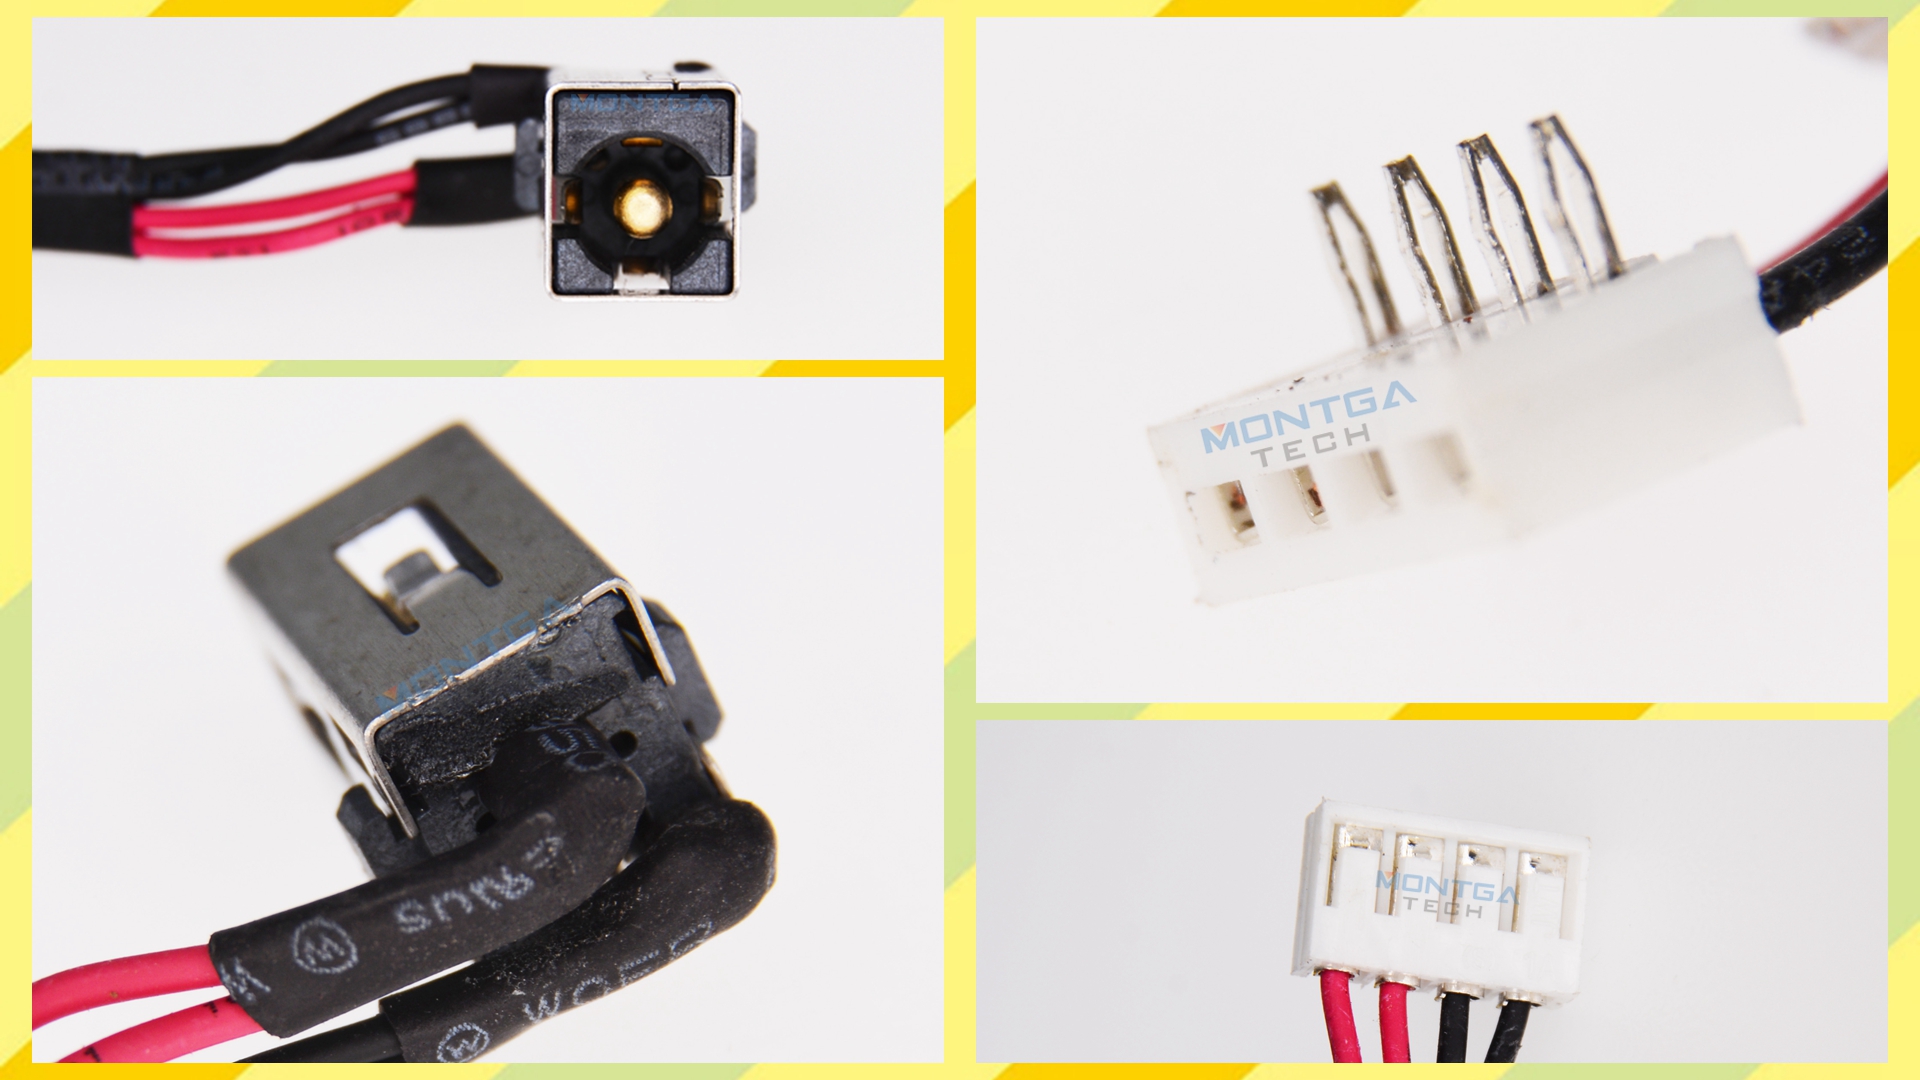 Asus A93SV DC Jack, DC IN Câble Asus A93SV, Asus A93SV Jack alimentation, Asus A93SV Power Jack, Asus A93SV Prise Connecteur, Asus A93SV Connecteur alimentation, Asus A93SV connecteur de charge, 